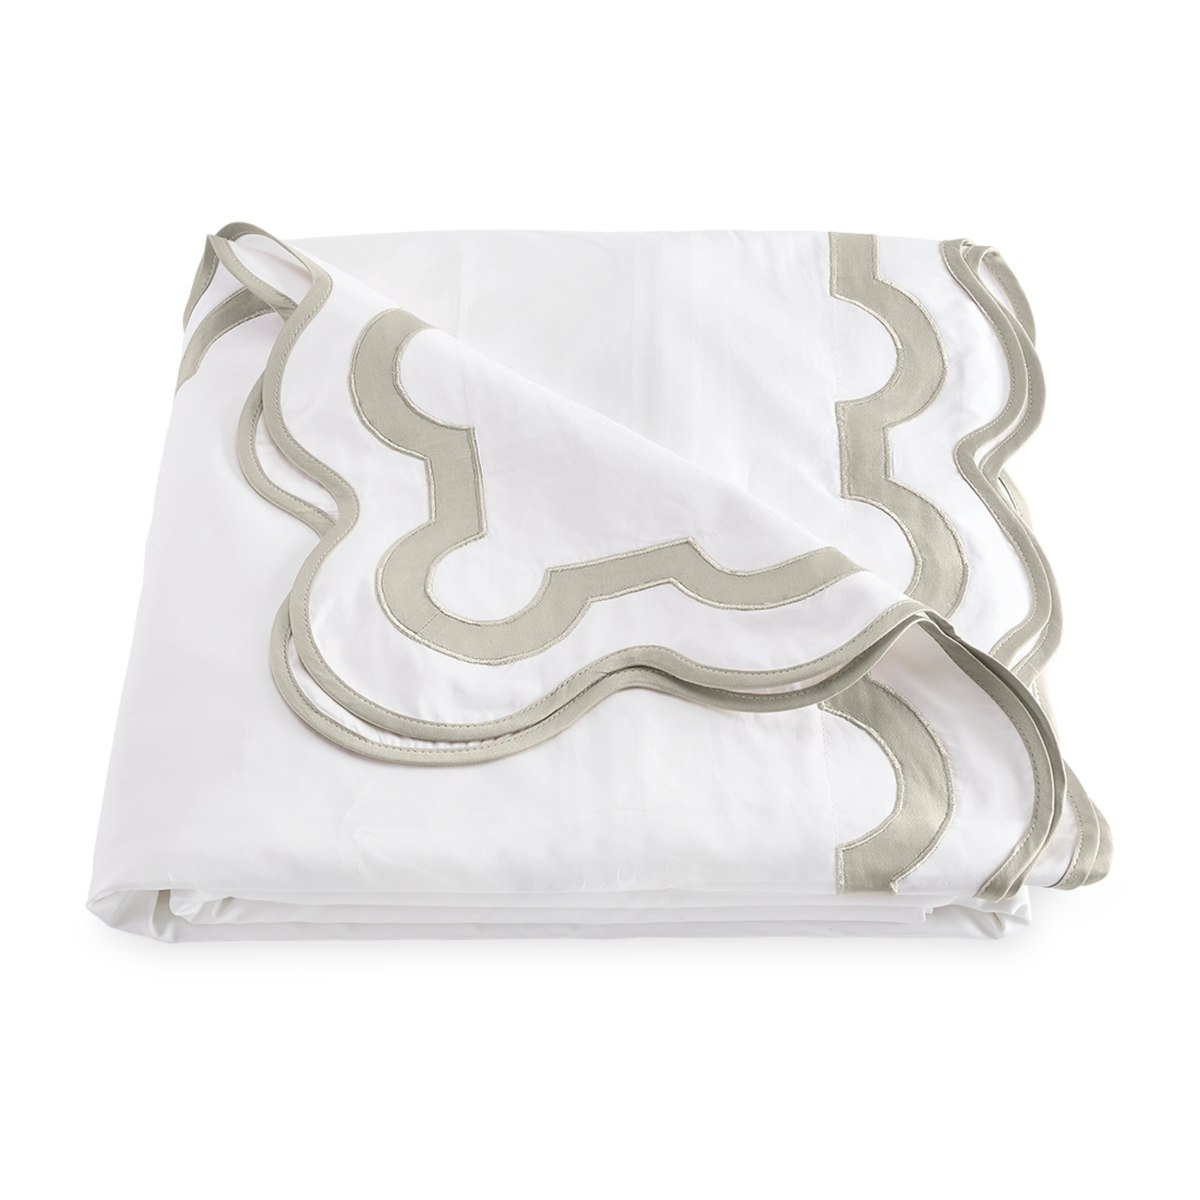 Folded Duvet Cover of Matouk Mirasol Collection in Silver Color